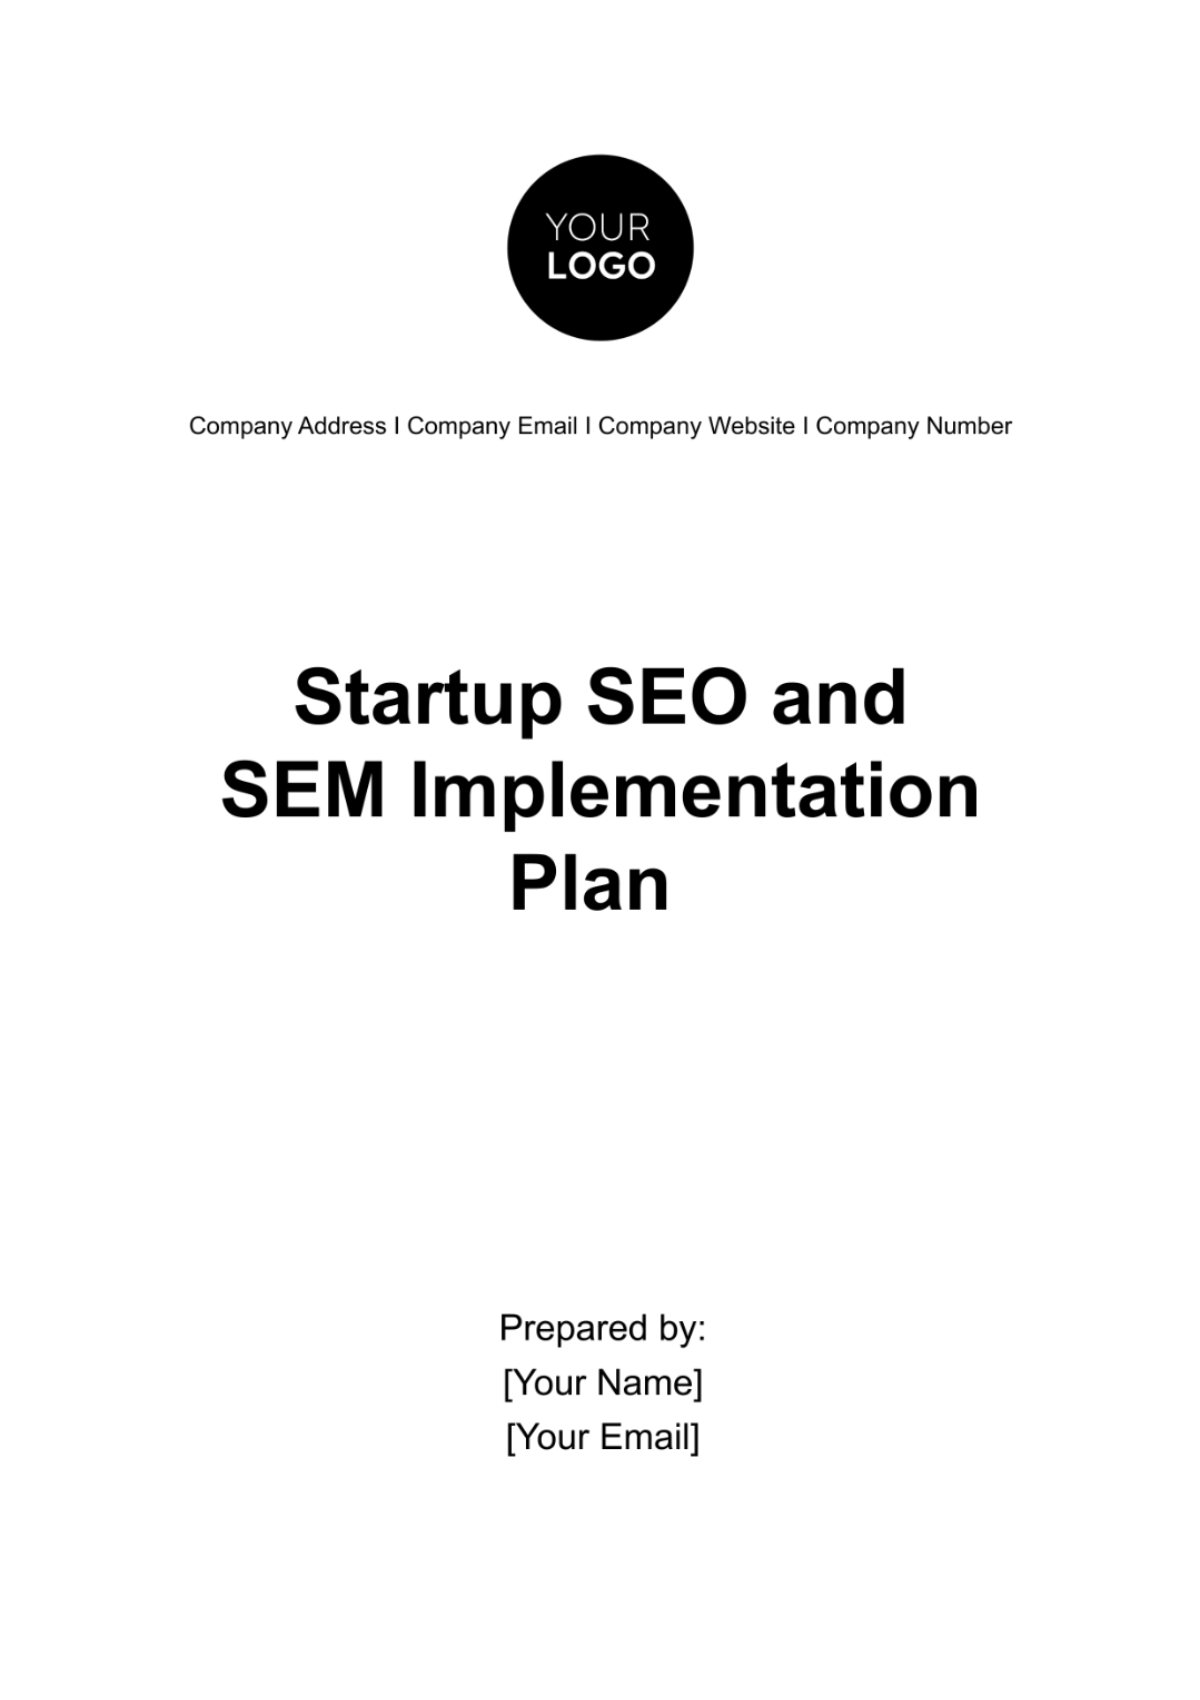 Startup SEO and SEM Implementation Plan Template